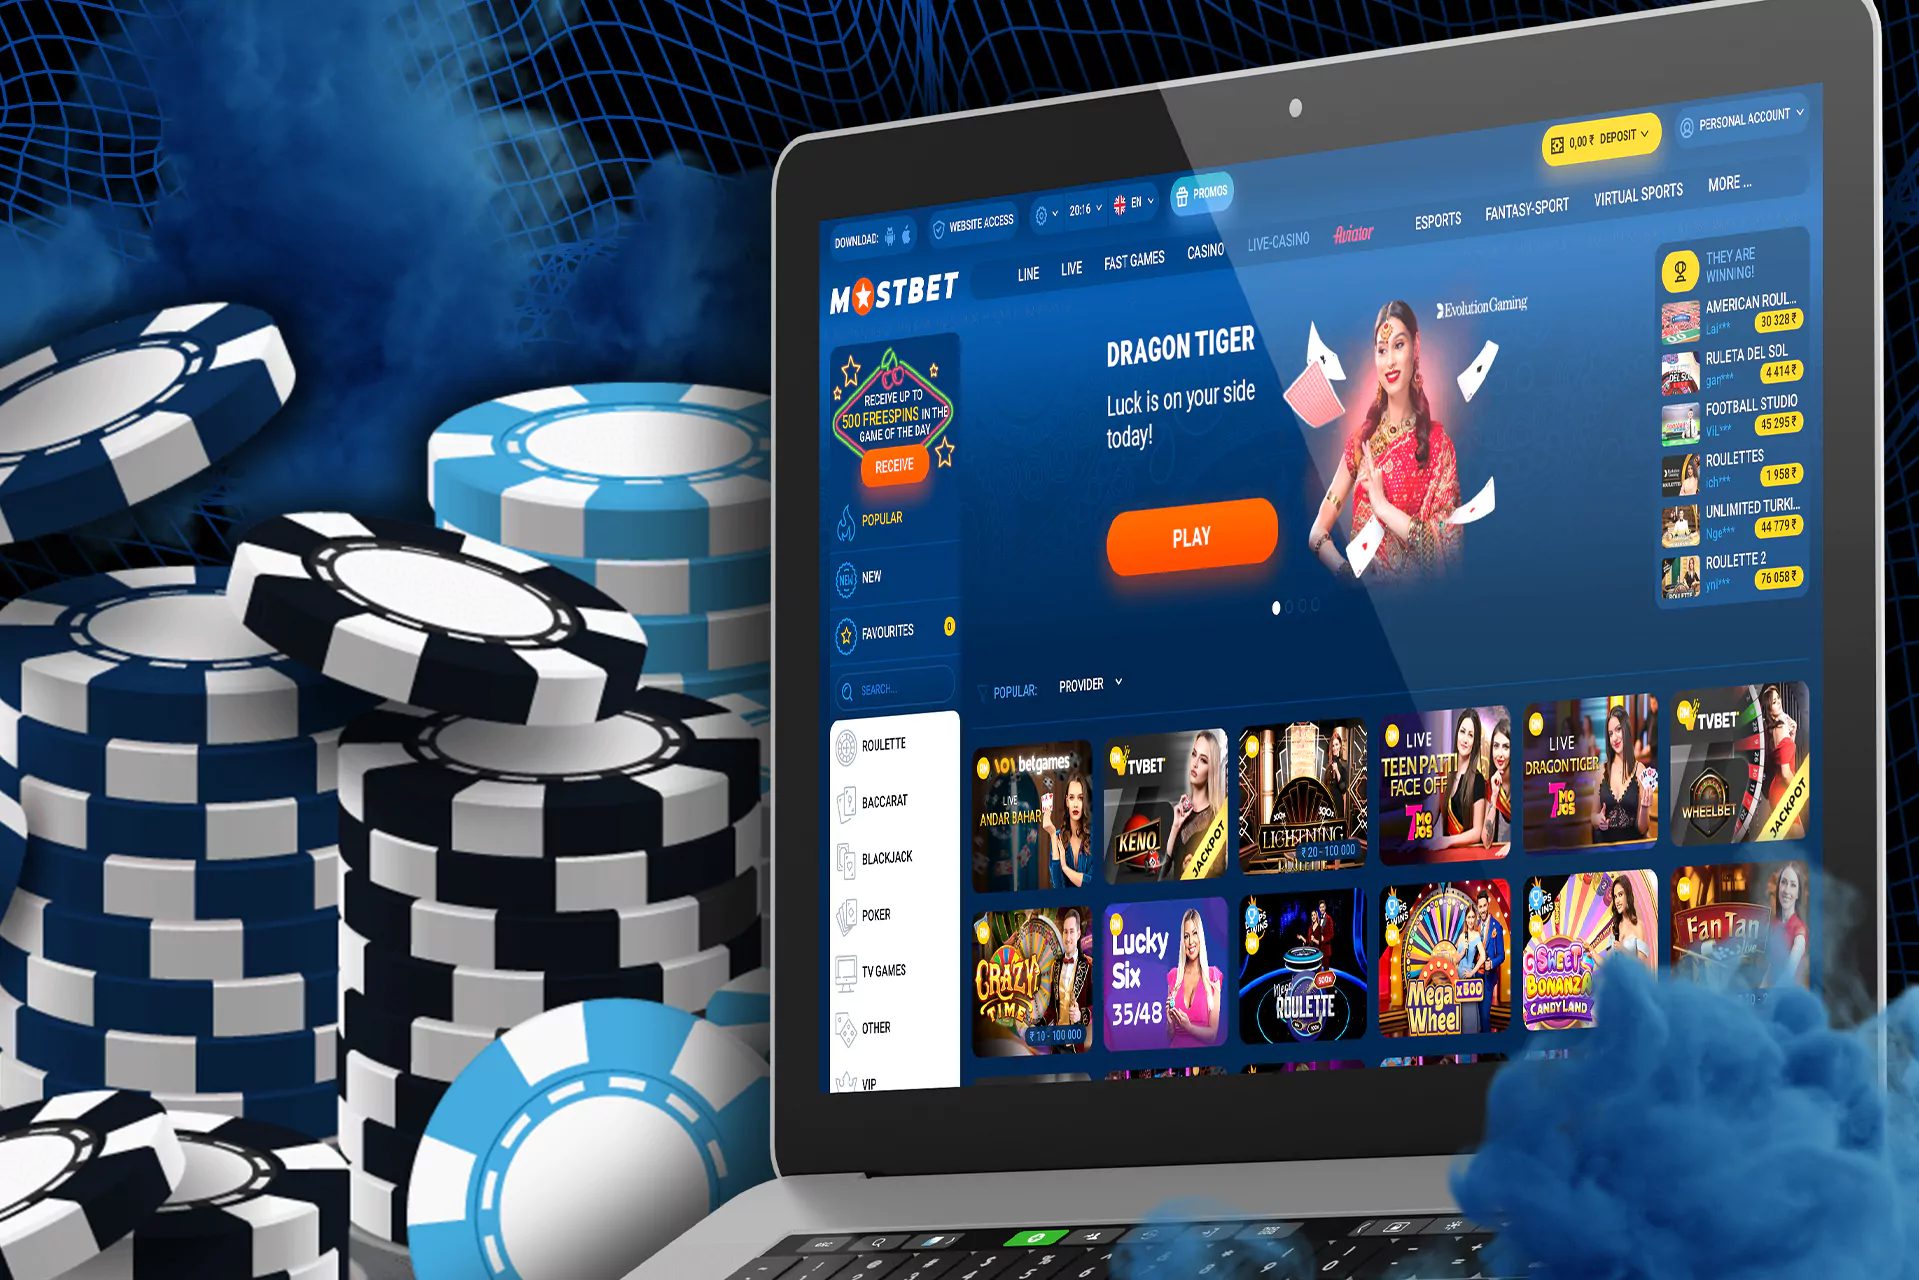 Play casino games against the real dealers at Mostbet.